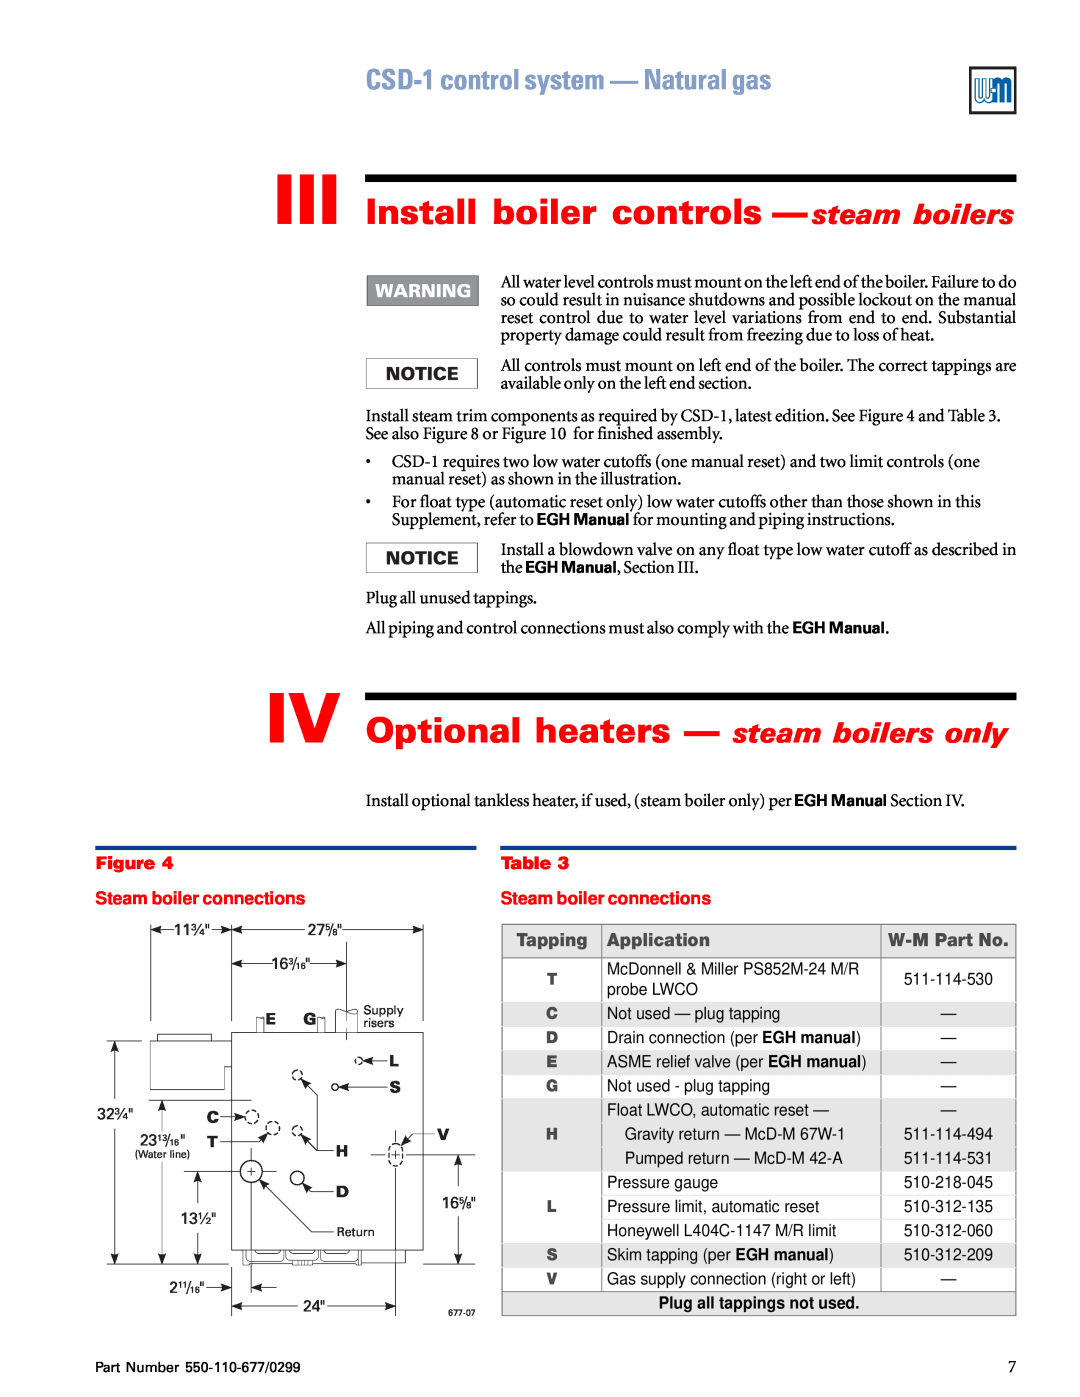 Weil-McLain EGH-125 III Install boiler controls - steam boilers, IV Optional heaters - steam boilers only, Application 